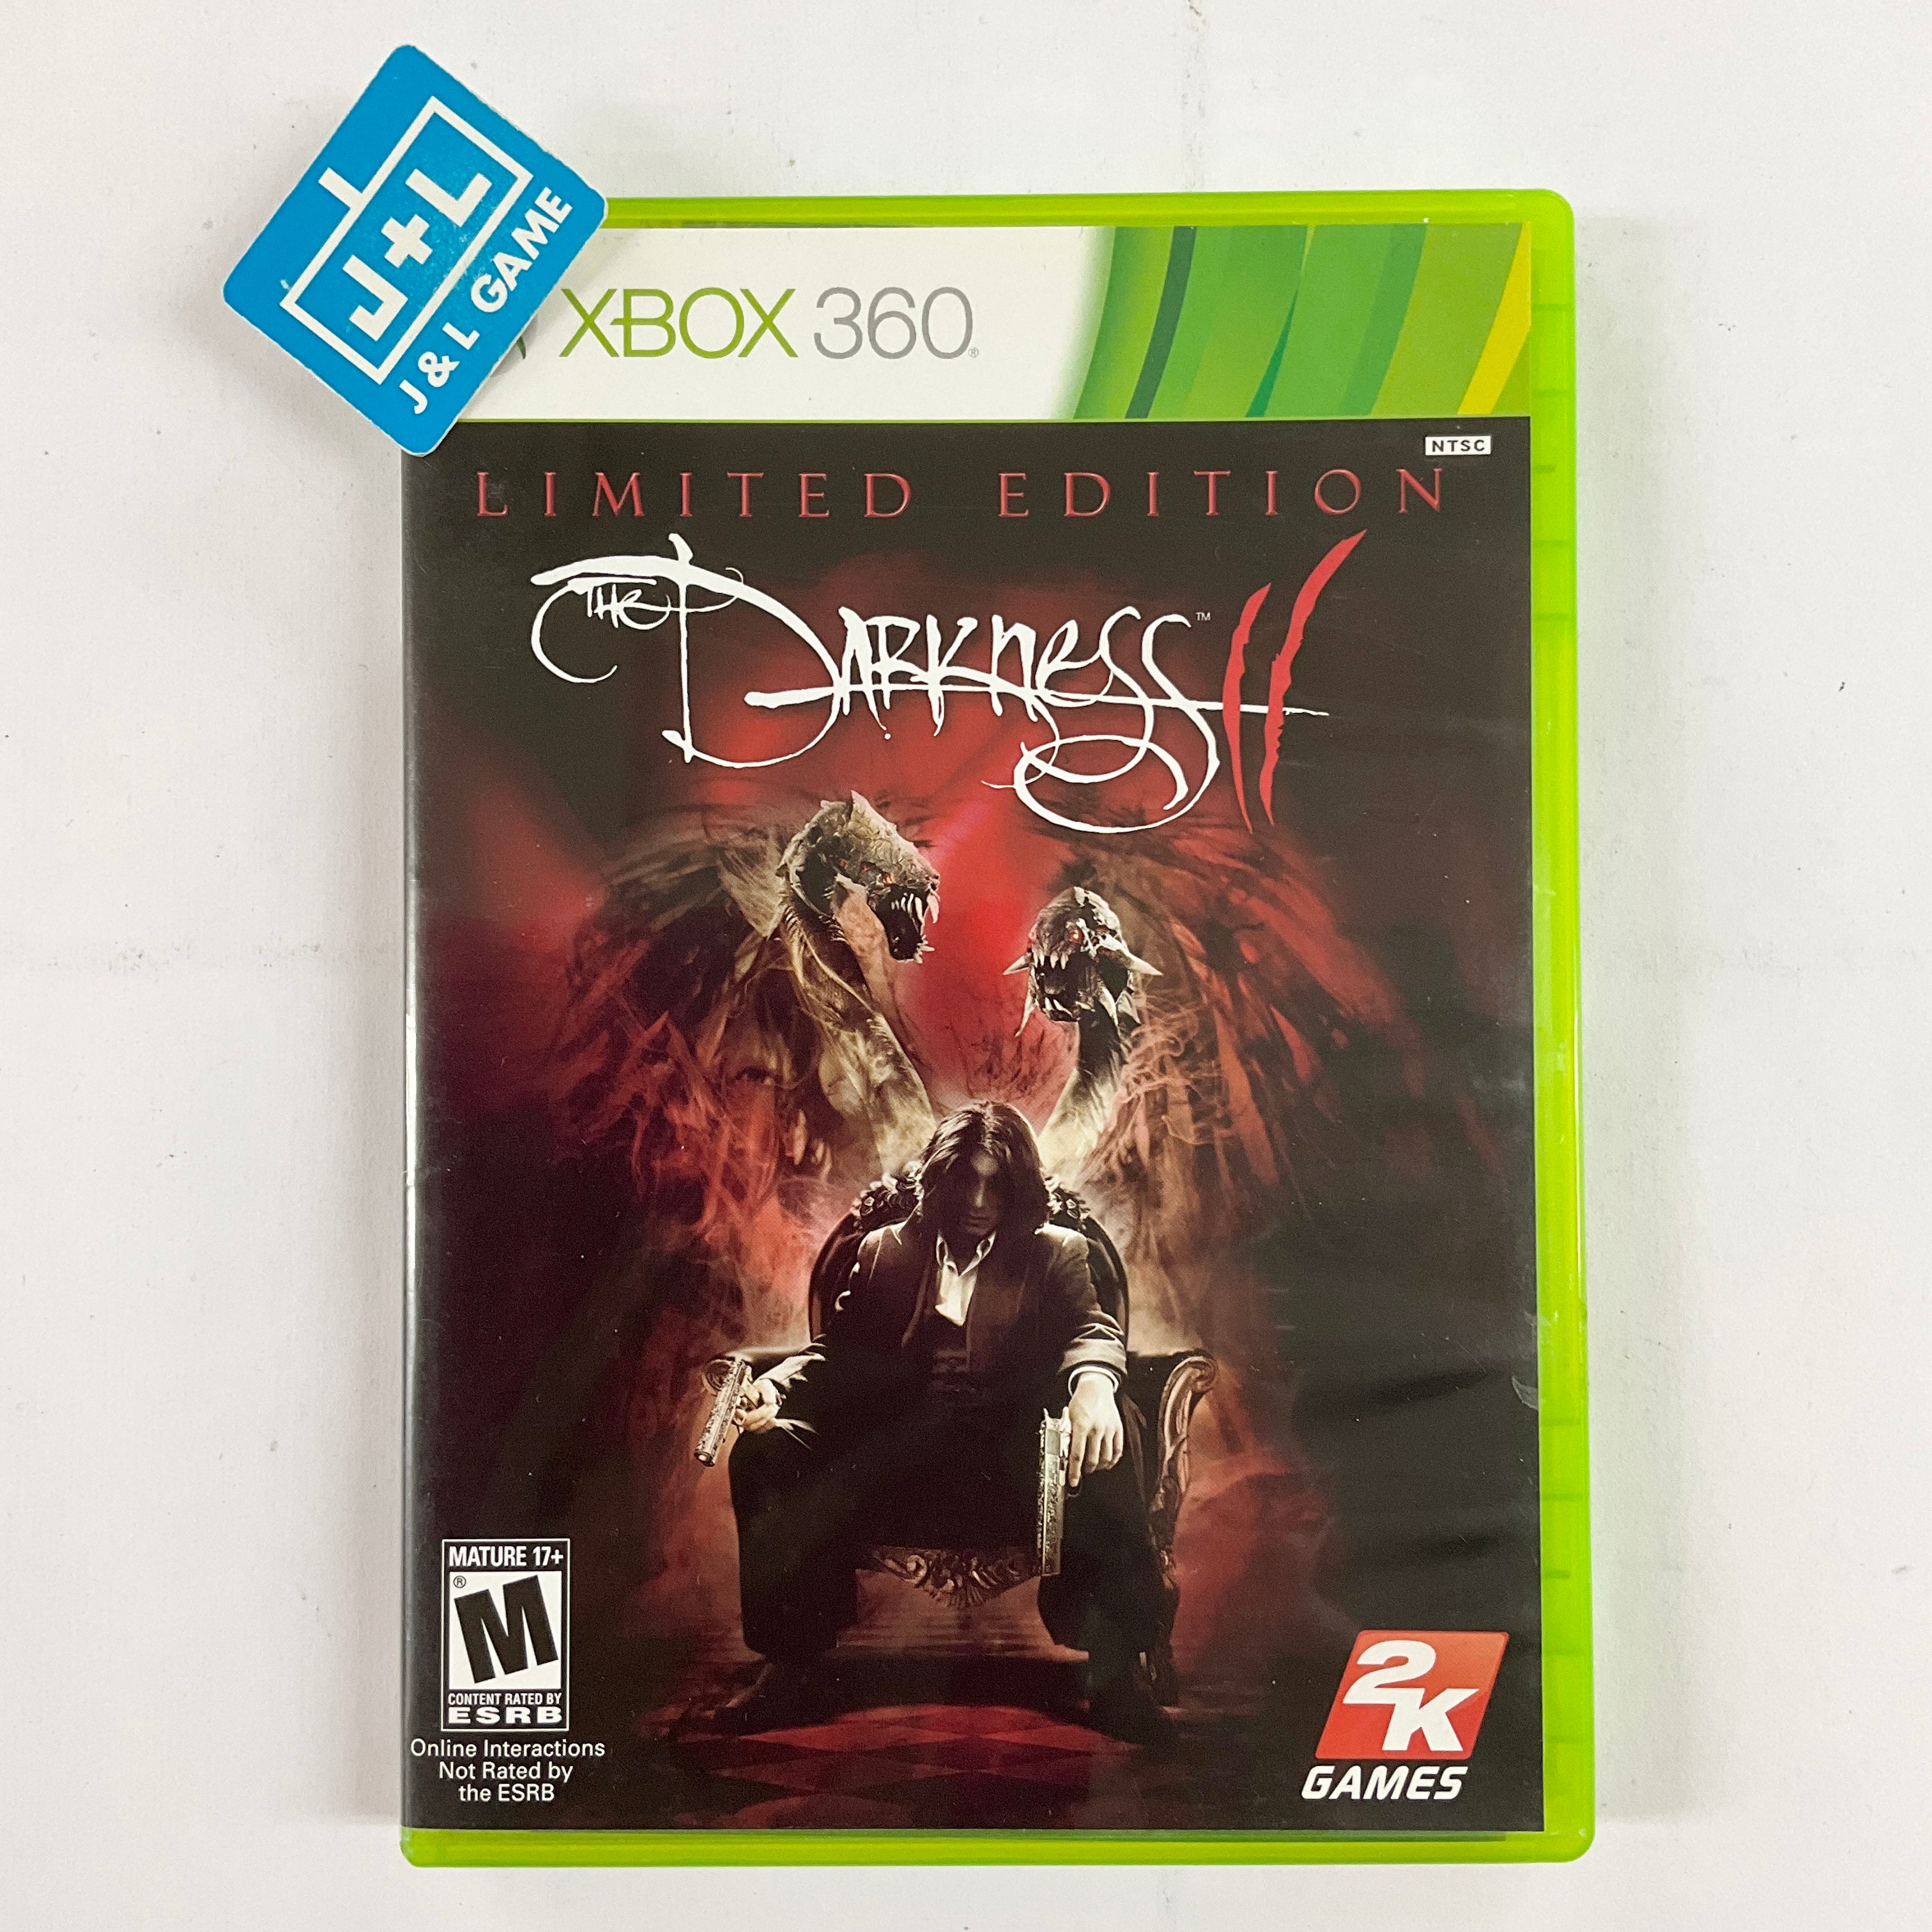 The Darkness II Limited Edition - Xbox 360 [Pre-Owned] Video Games 2K Games   